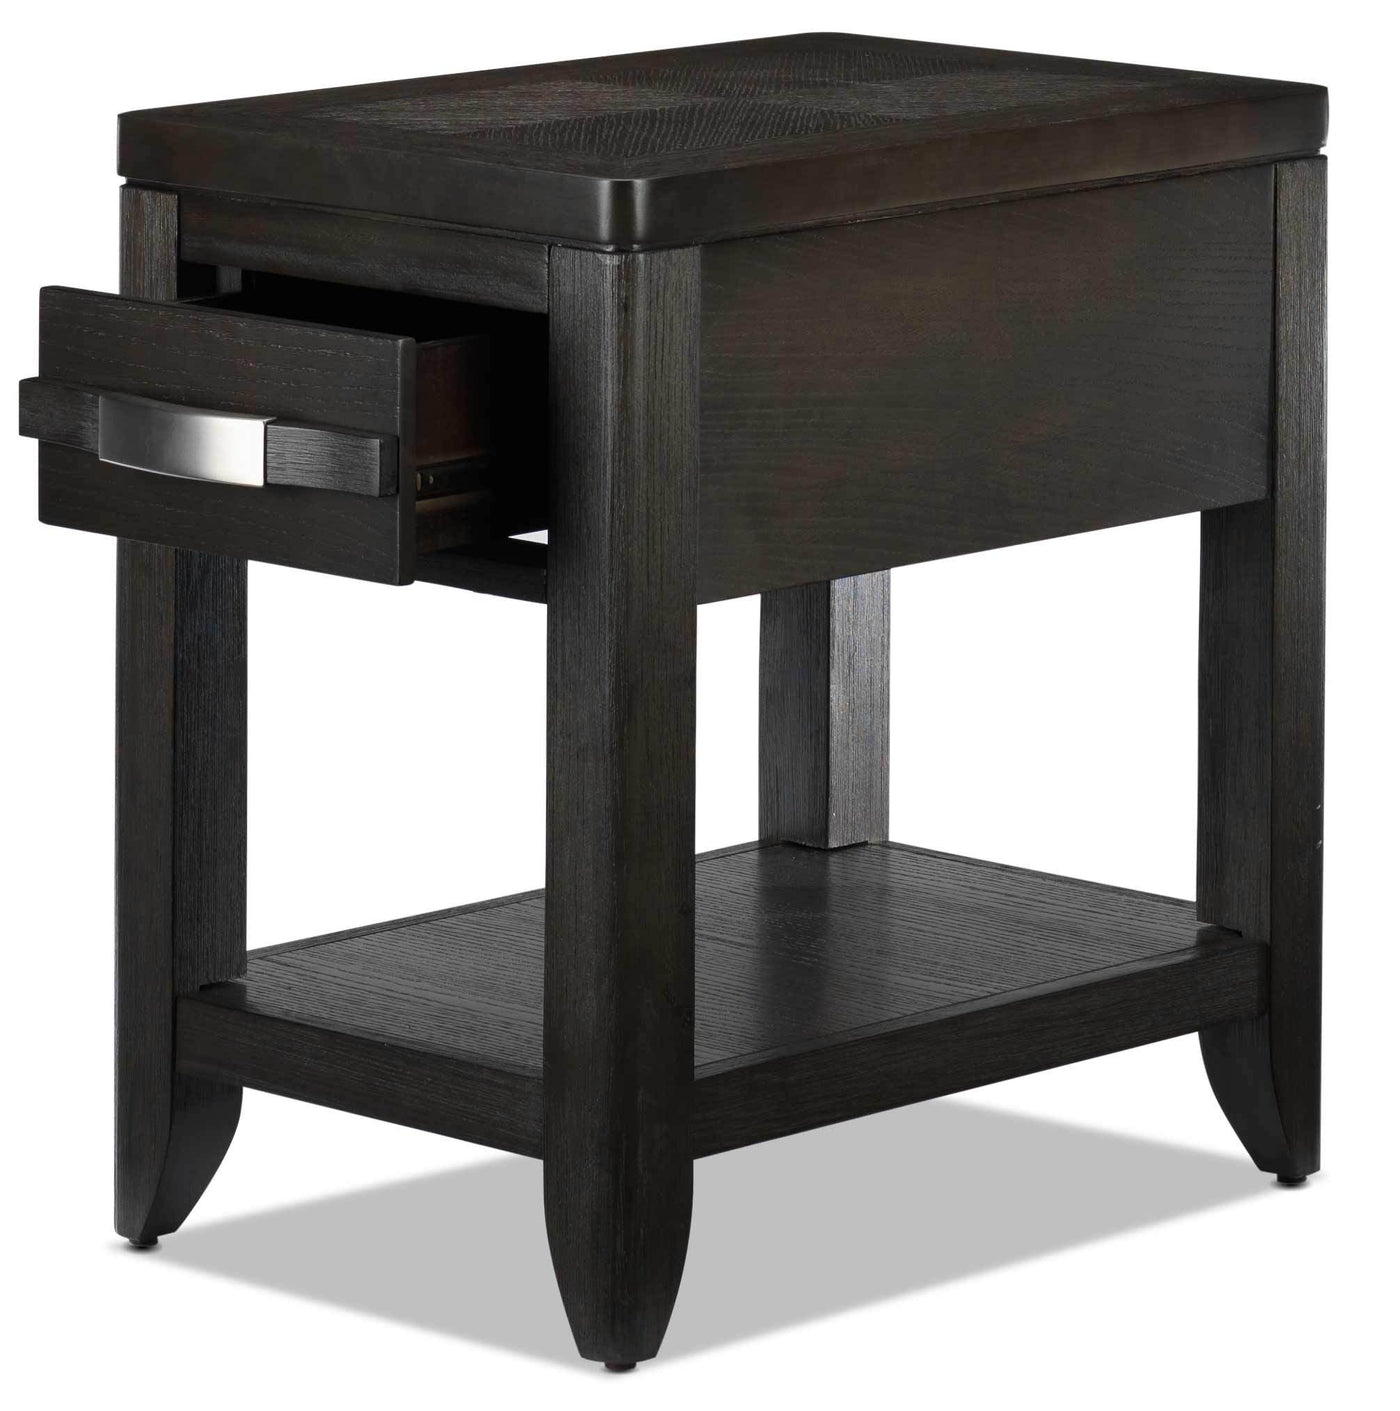 Manila Chairside Table - Brown